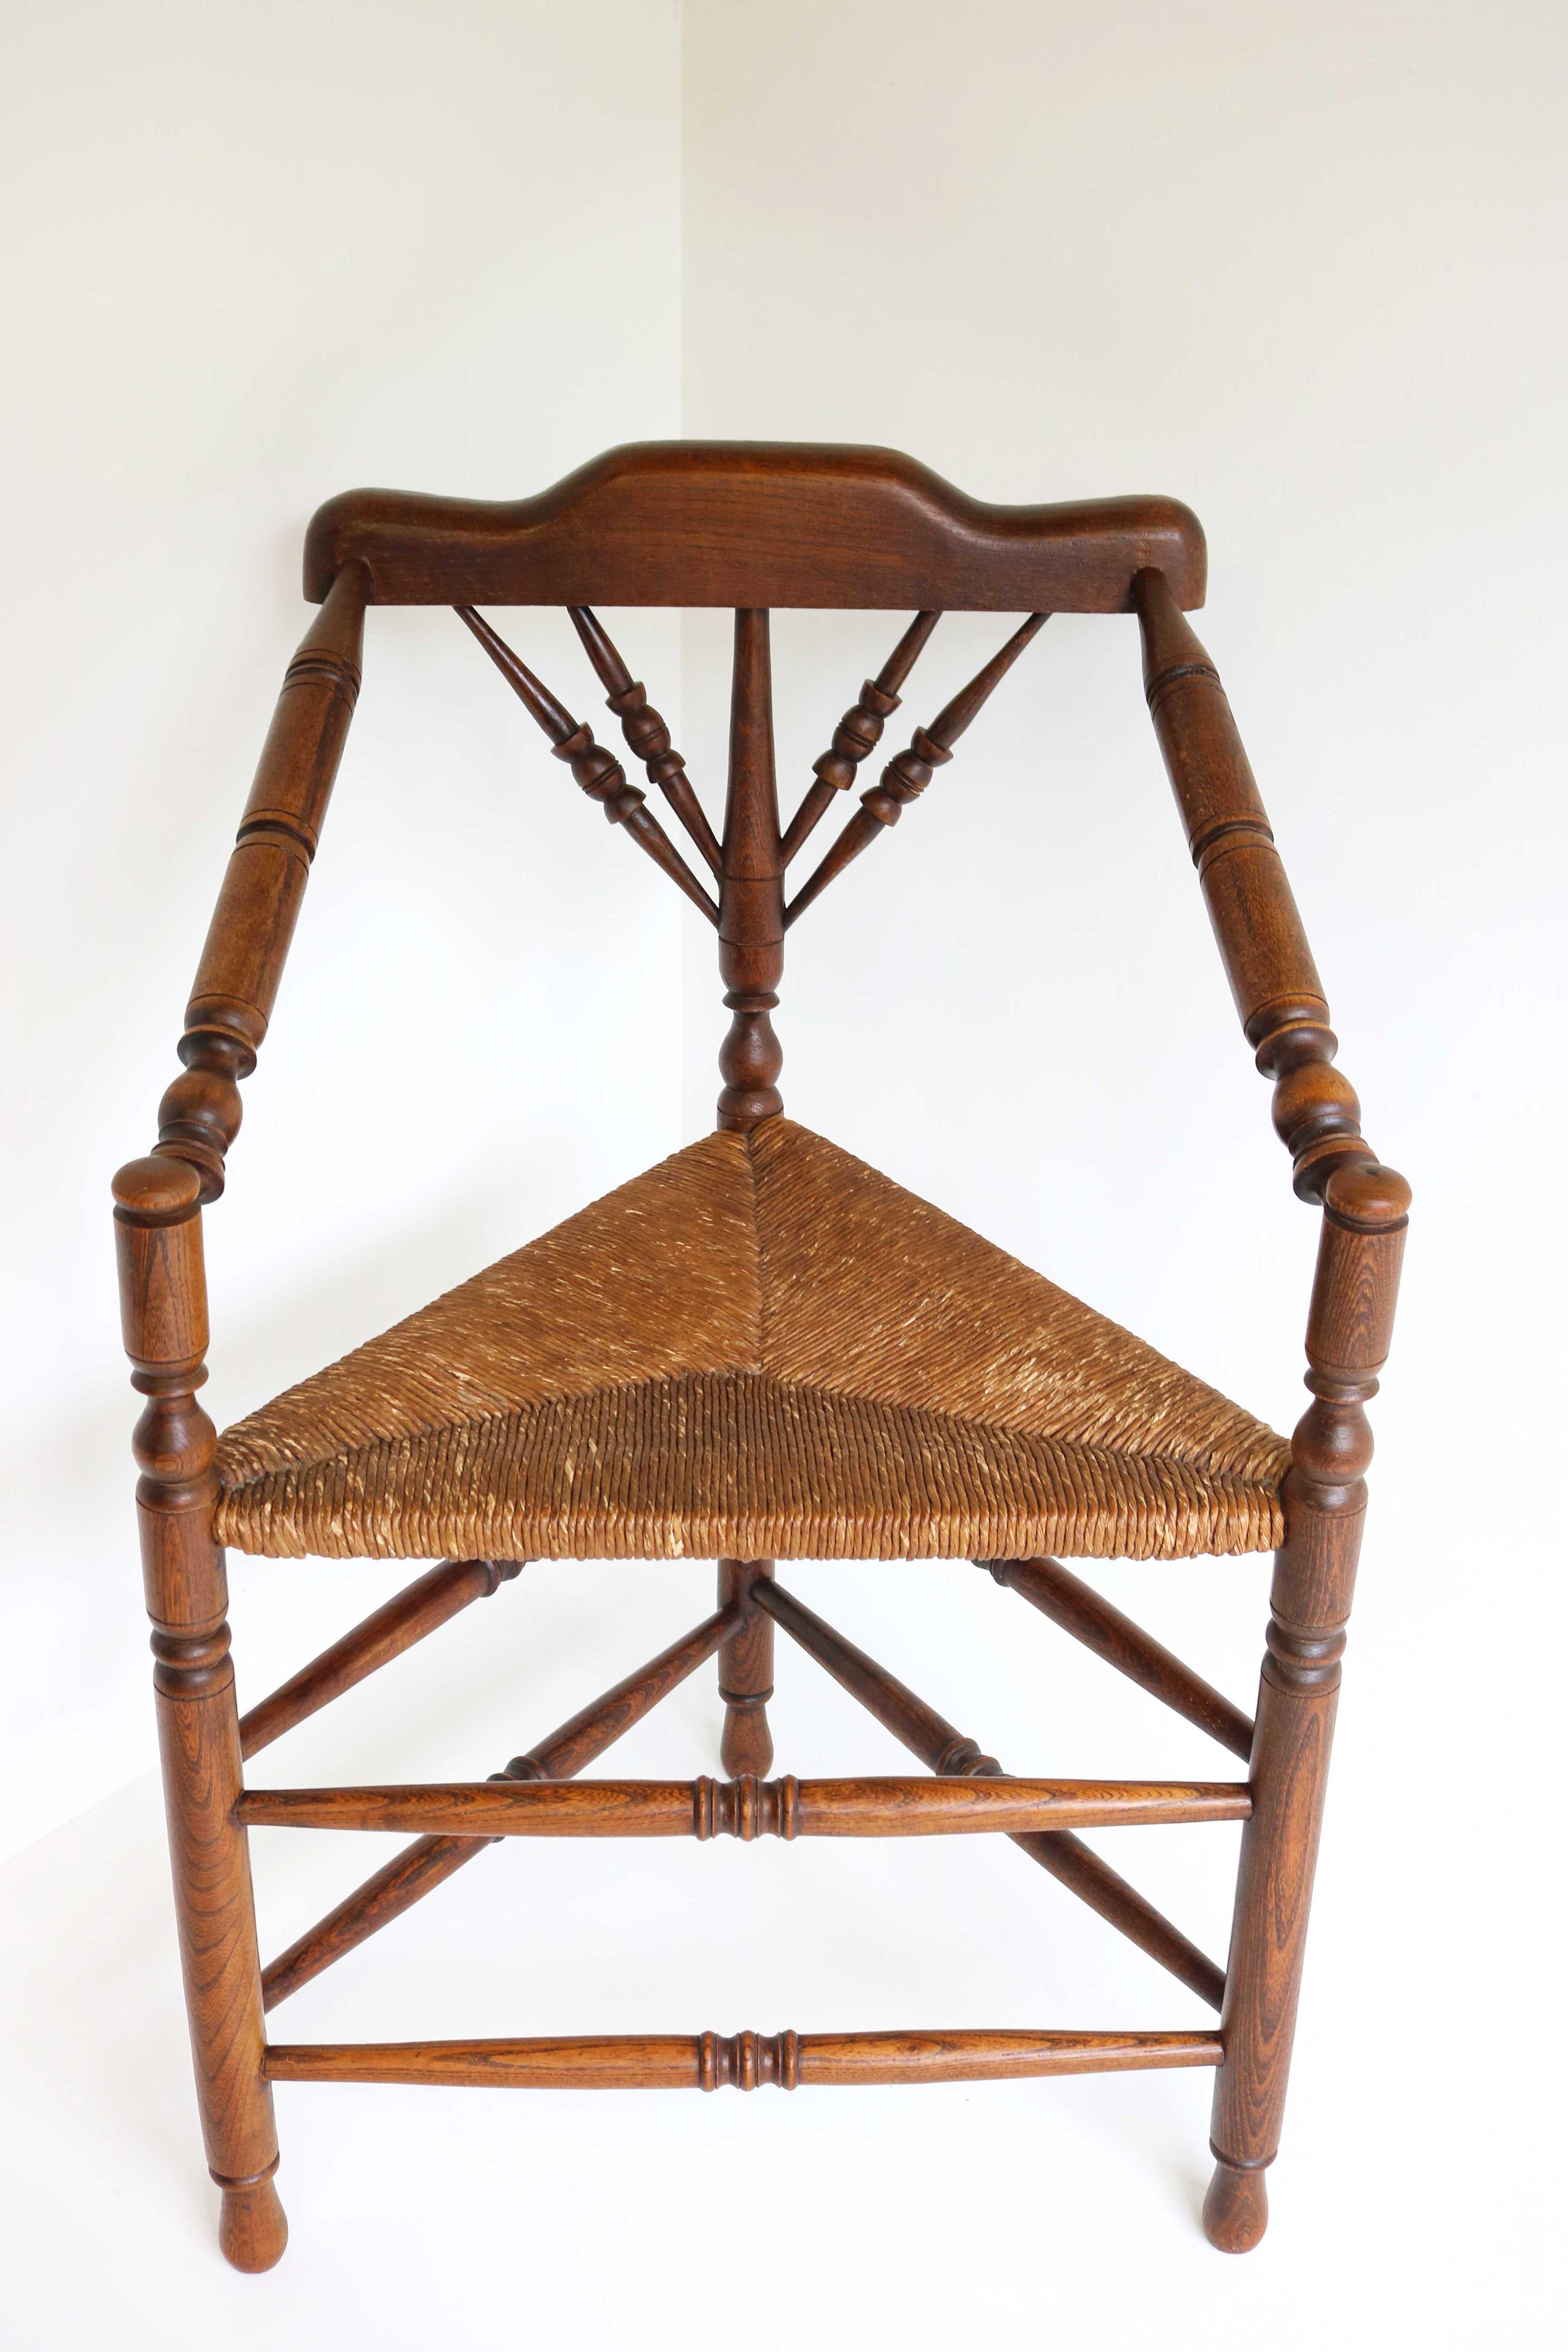 Late 19th century Edwardian style wooden armchair with rush seat, ca 1900
Manufactured in U.K.
Beautiful English antique knitting chair with three legs.
This old sturdy chair with turned legs is called a knitting chair.
Because of the slanted